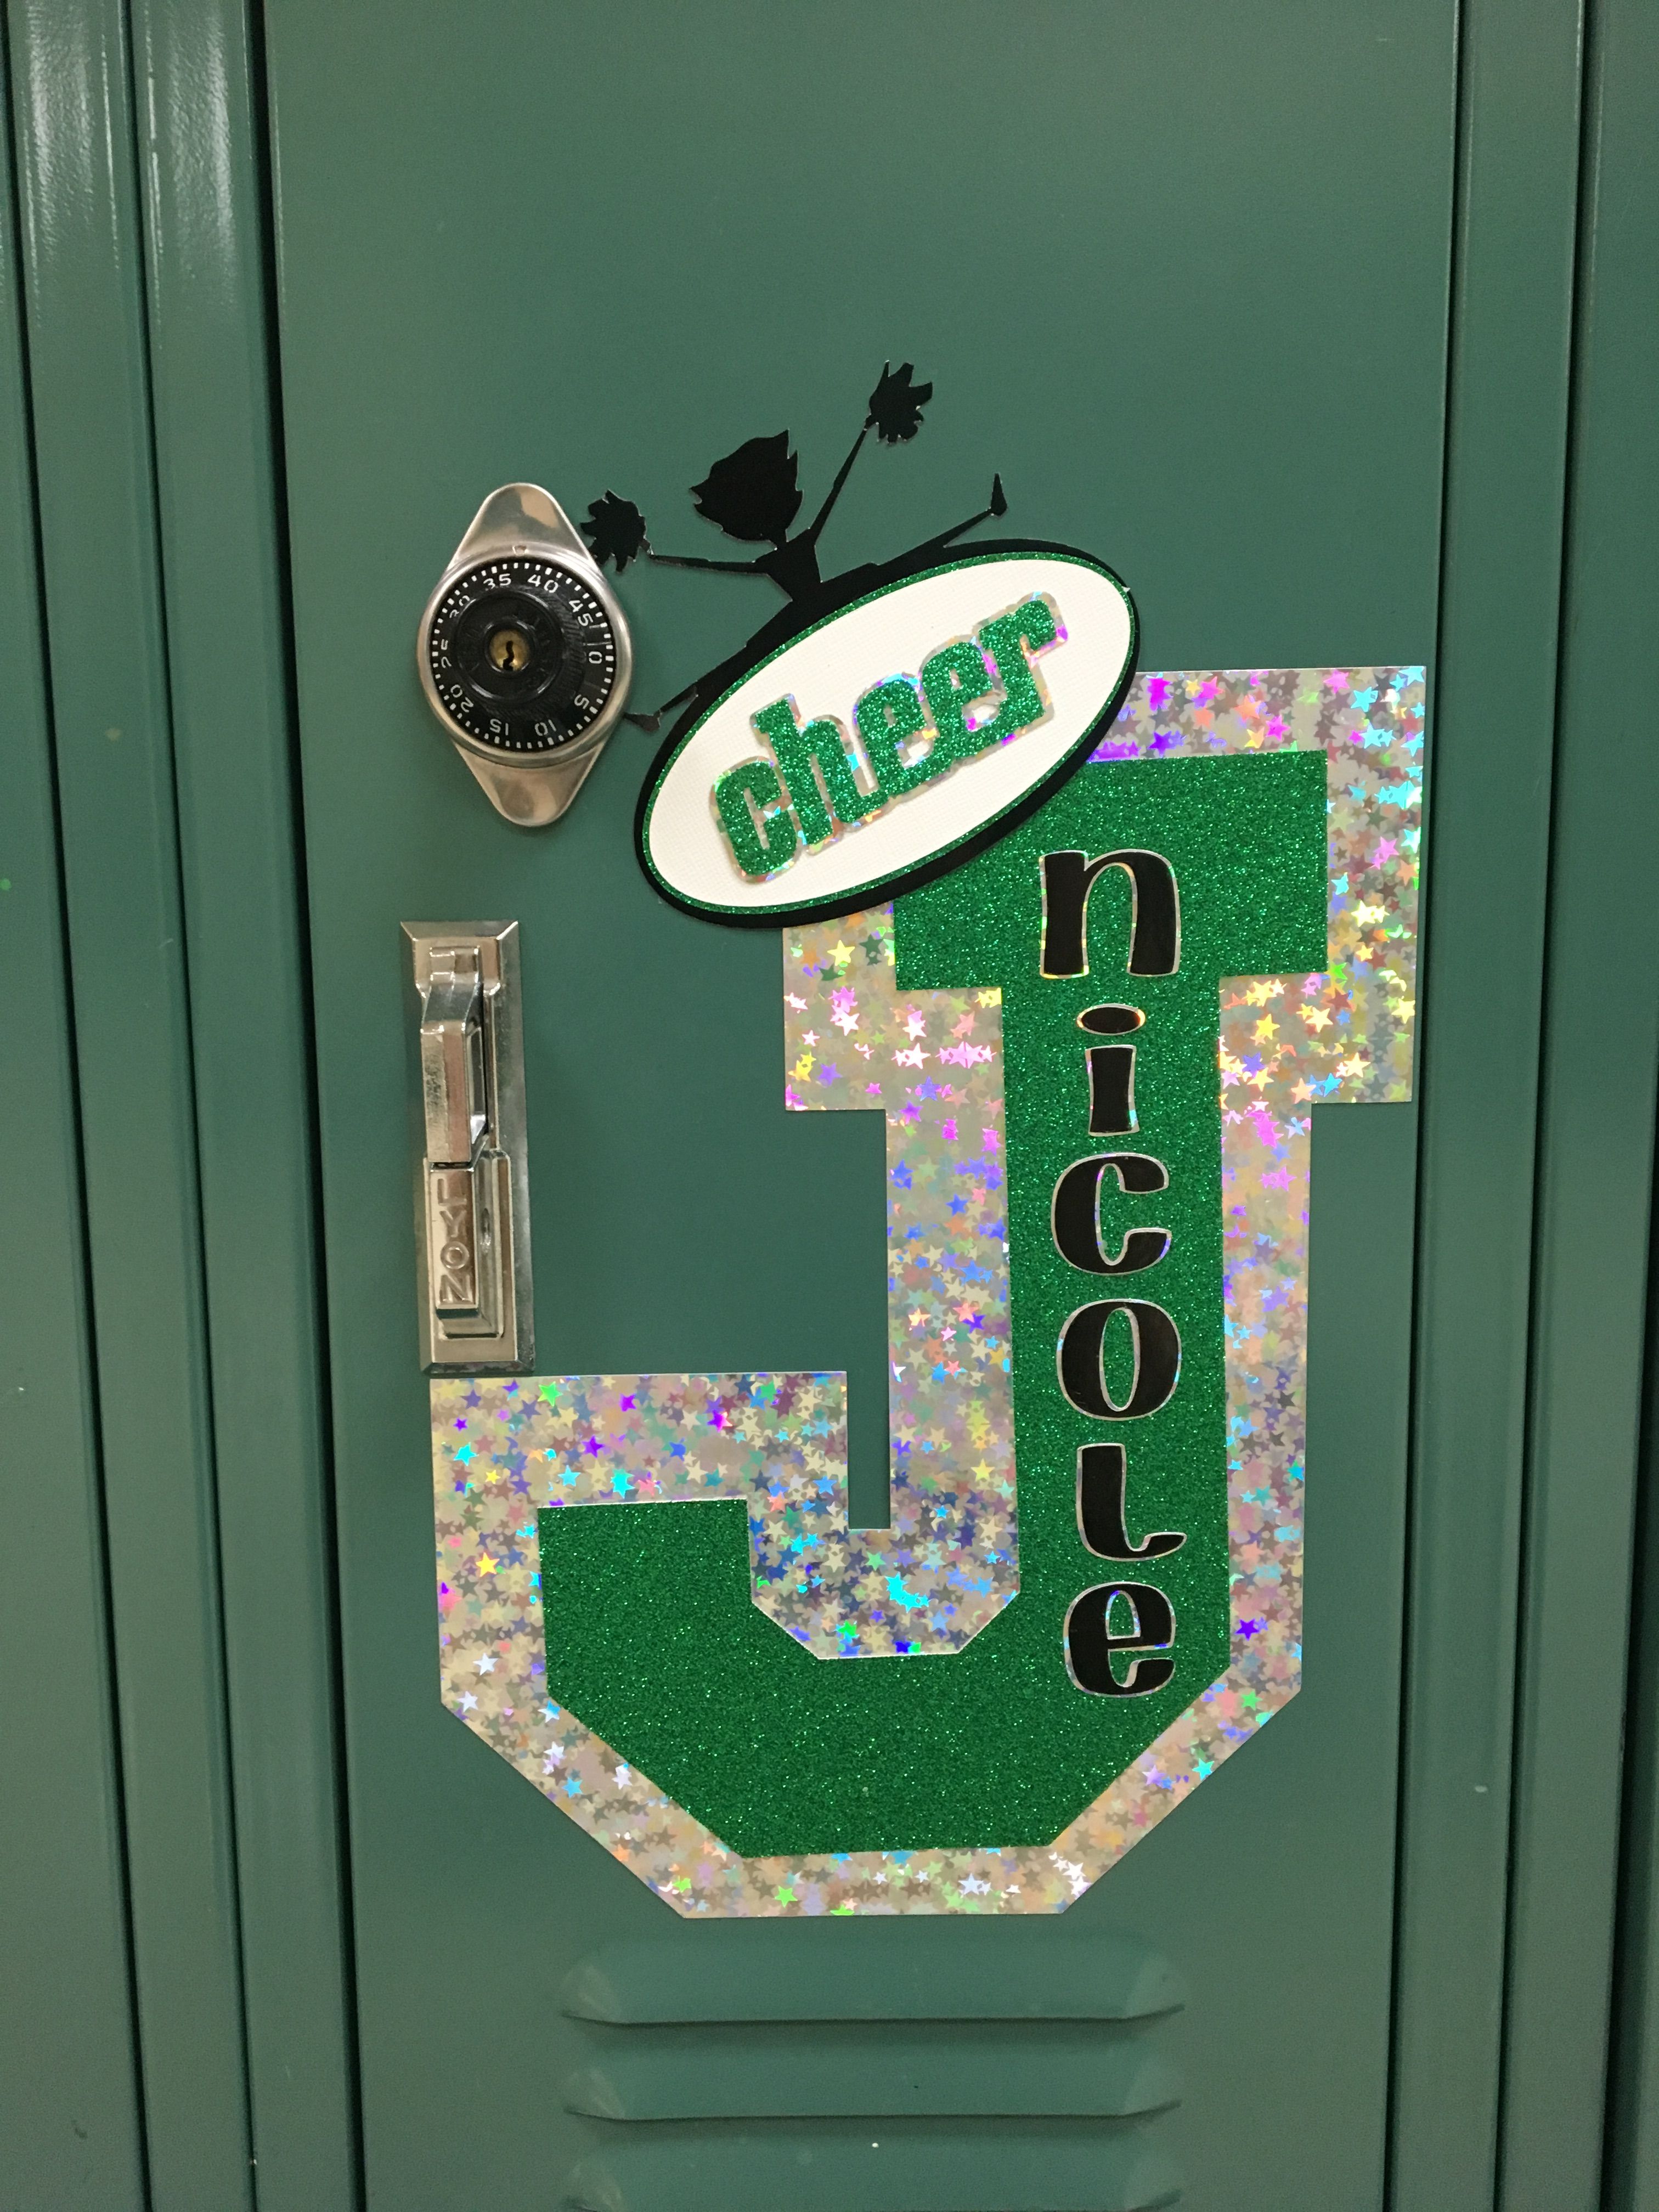 cindy boulton recommends cheer locker decorations pic